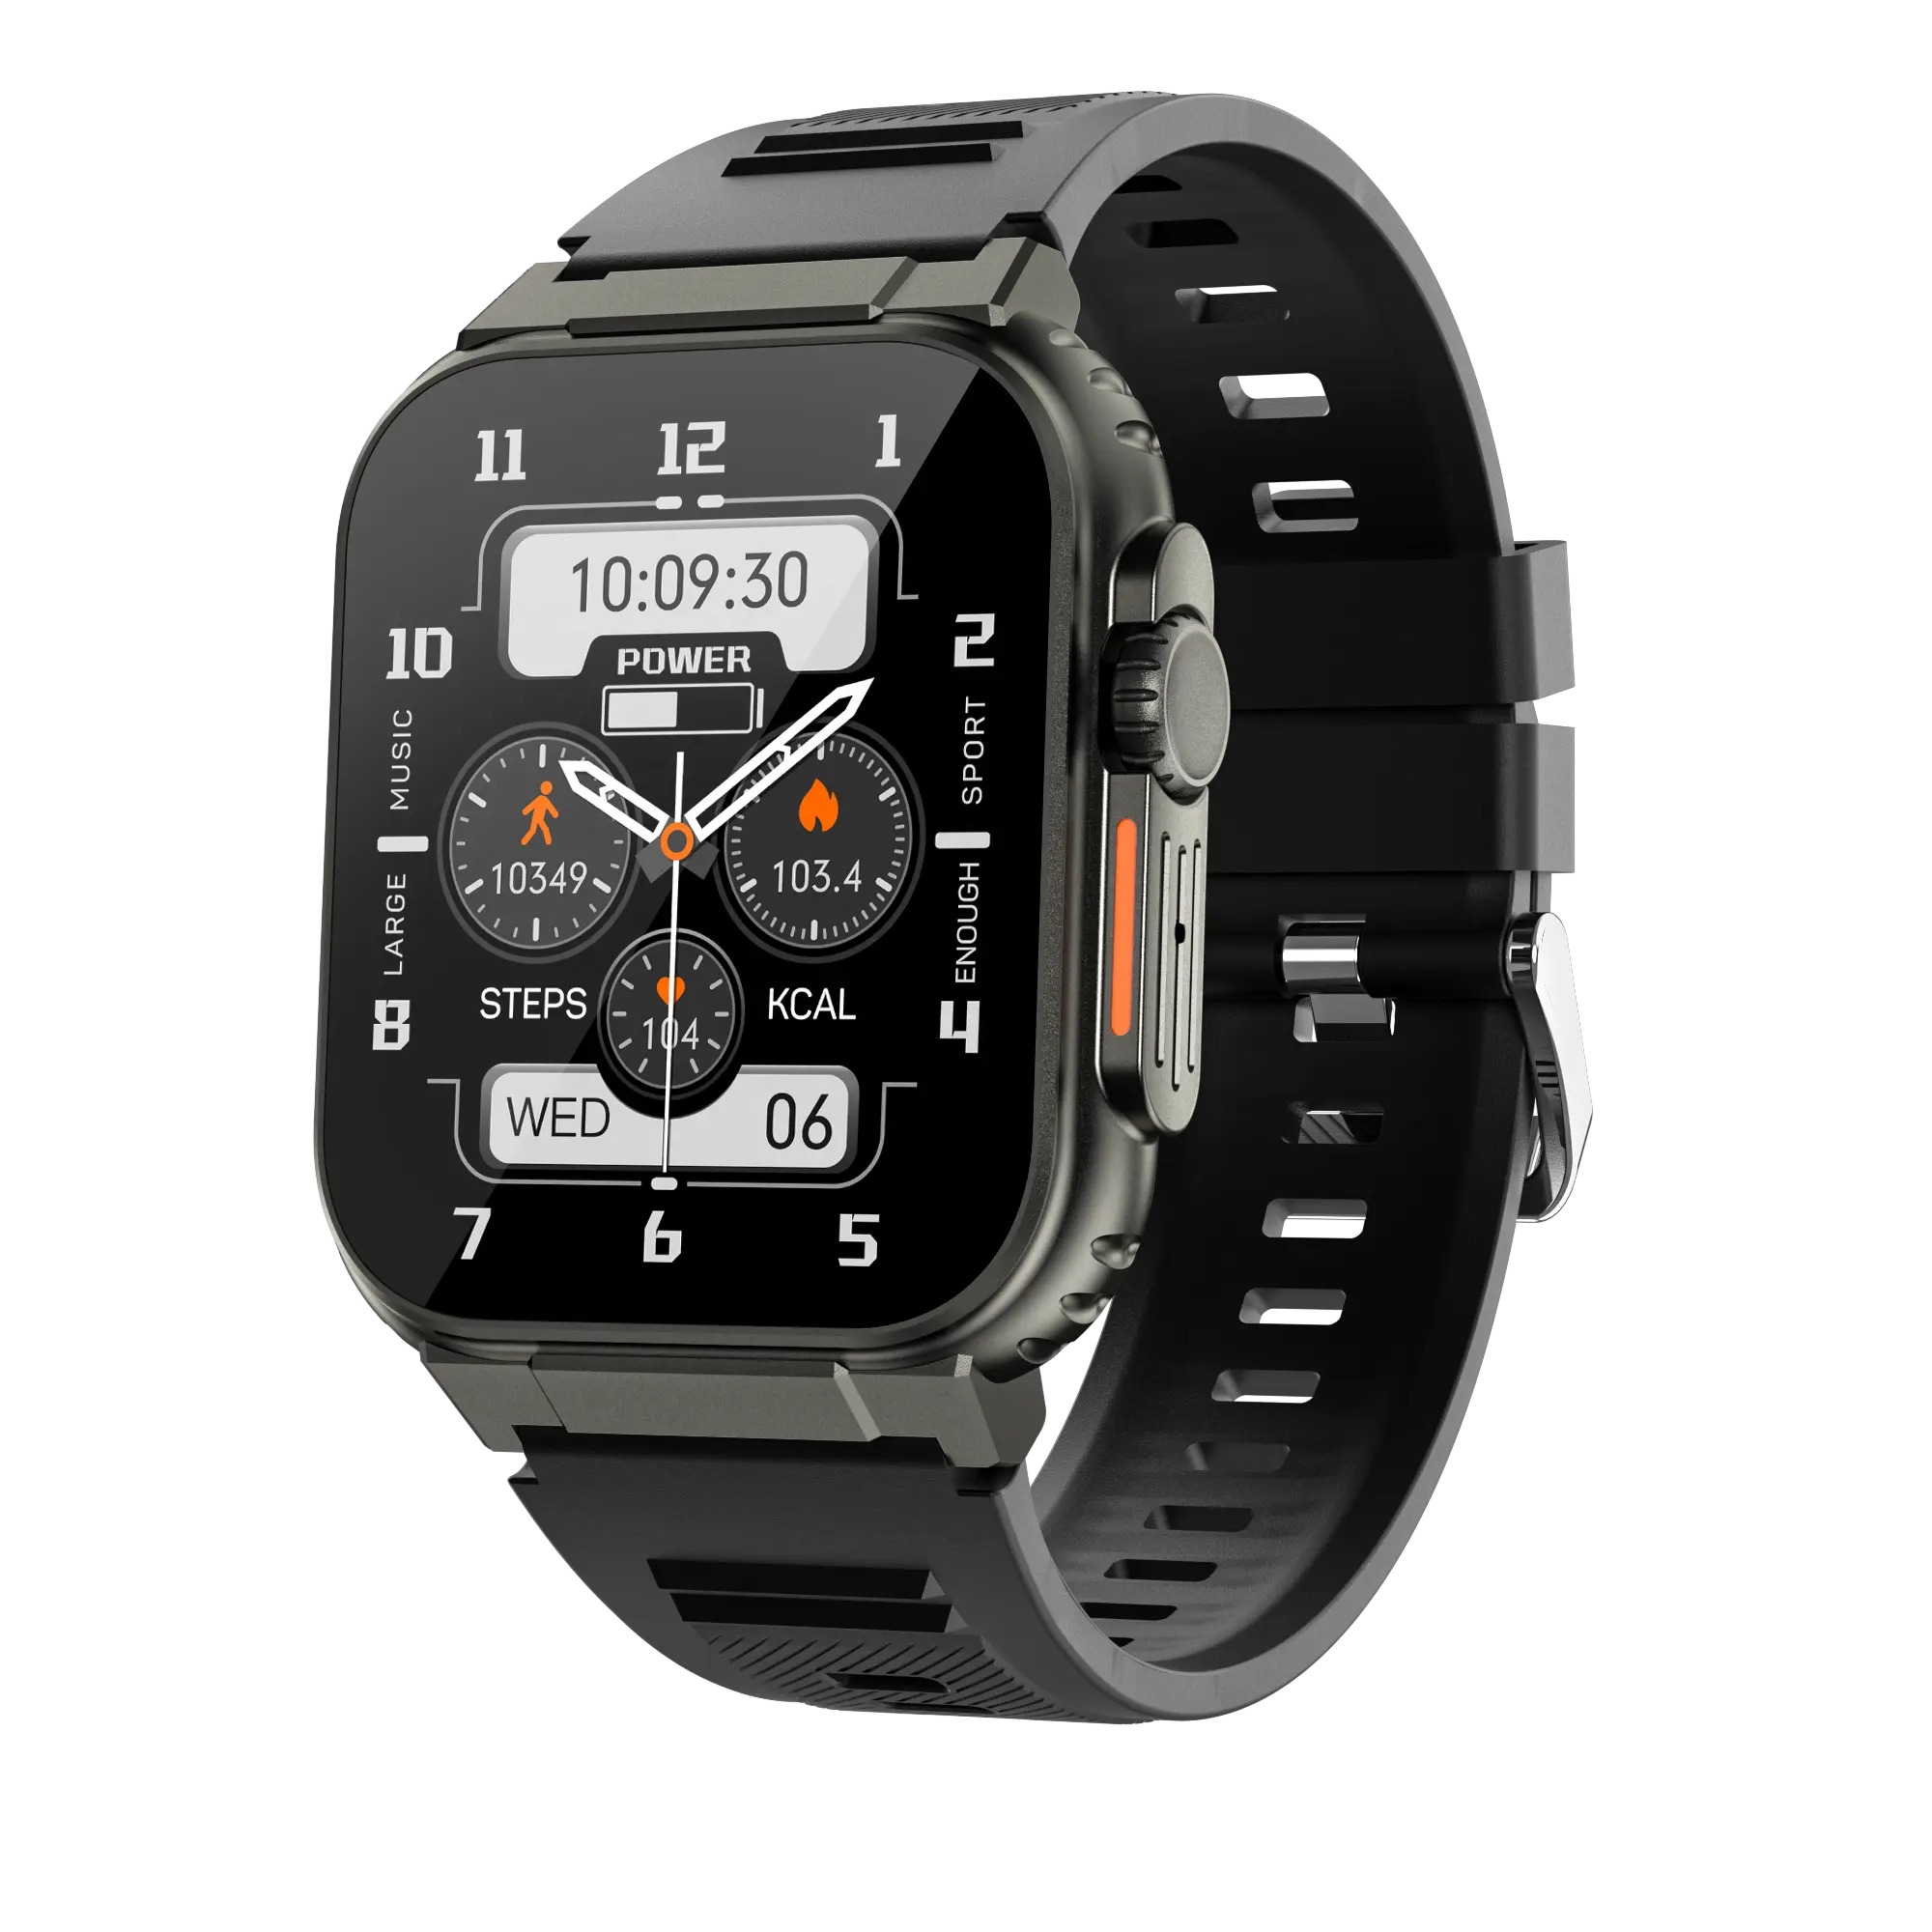 A70 health smart watch Local music IP68 waterproof sport smart watch for recording big battery 600 MAH with BT calling